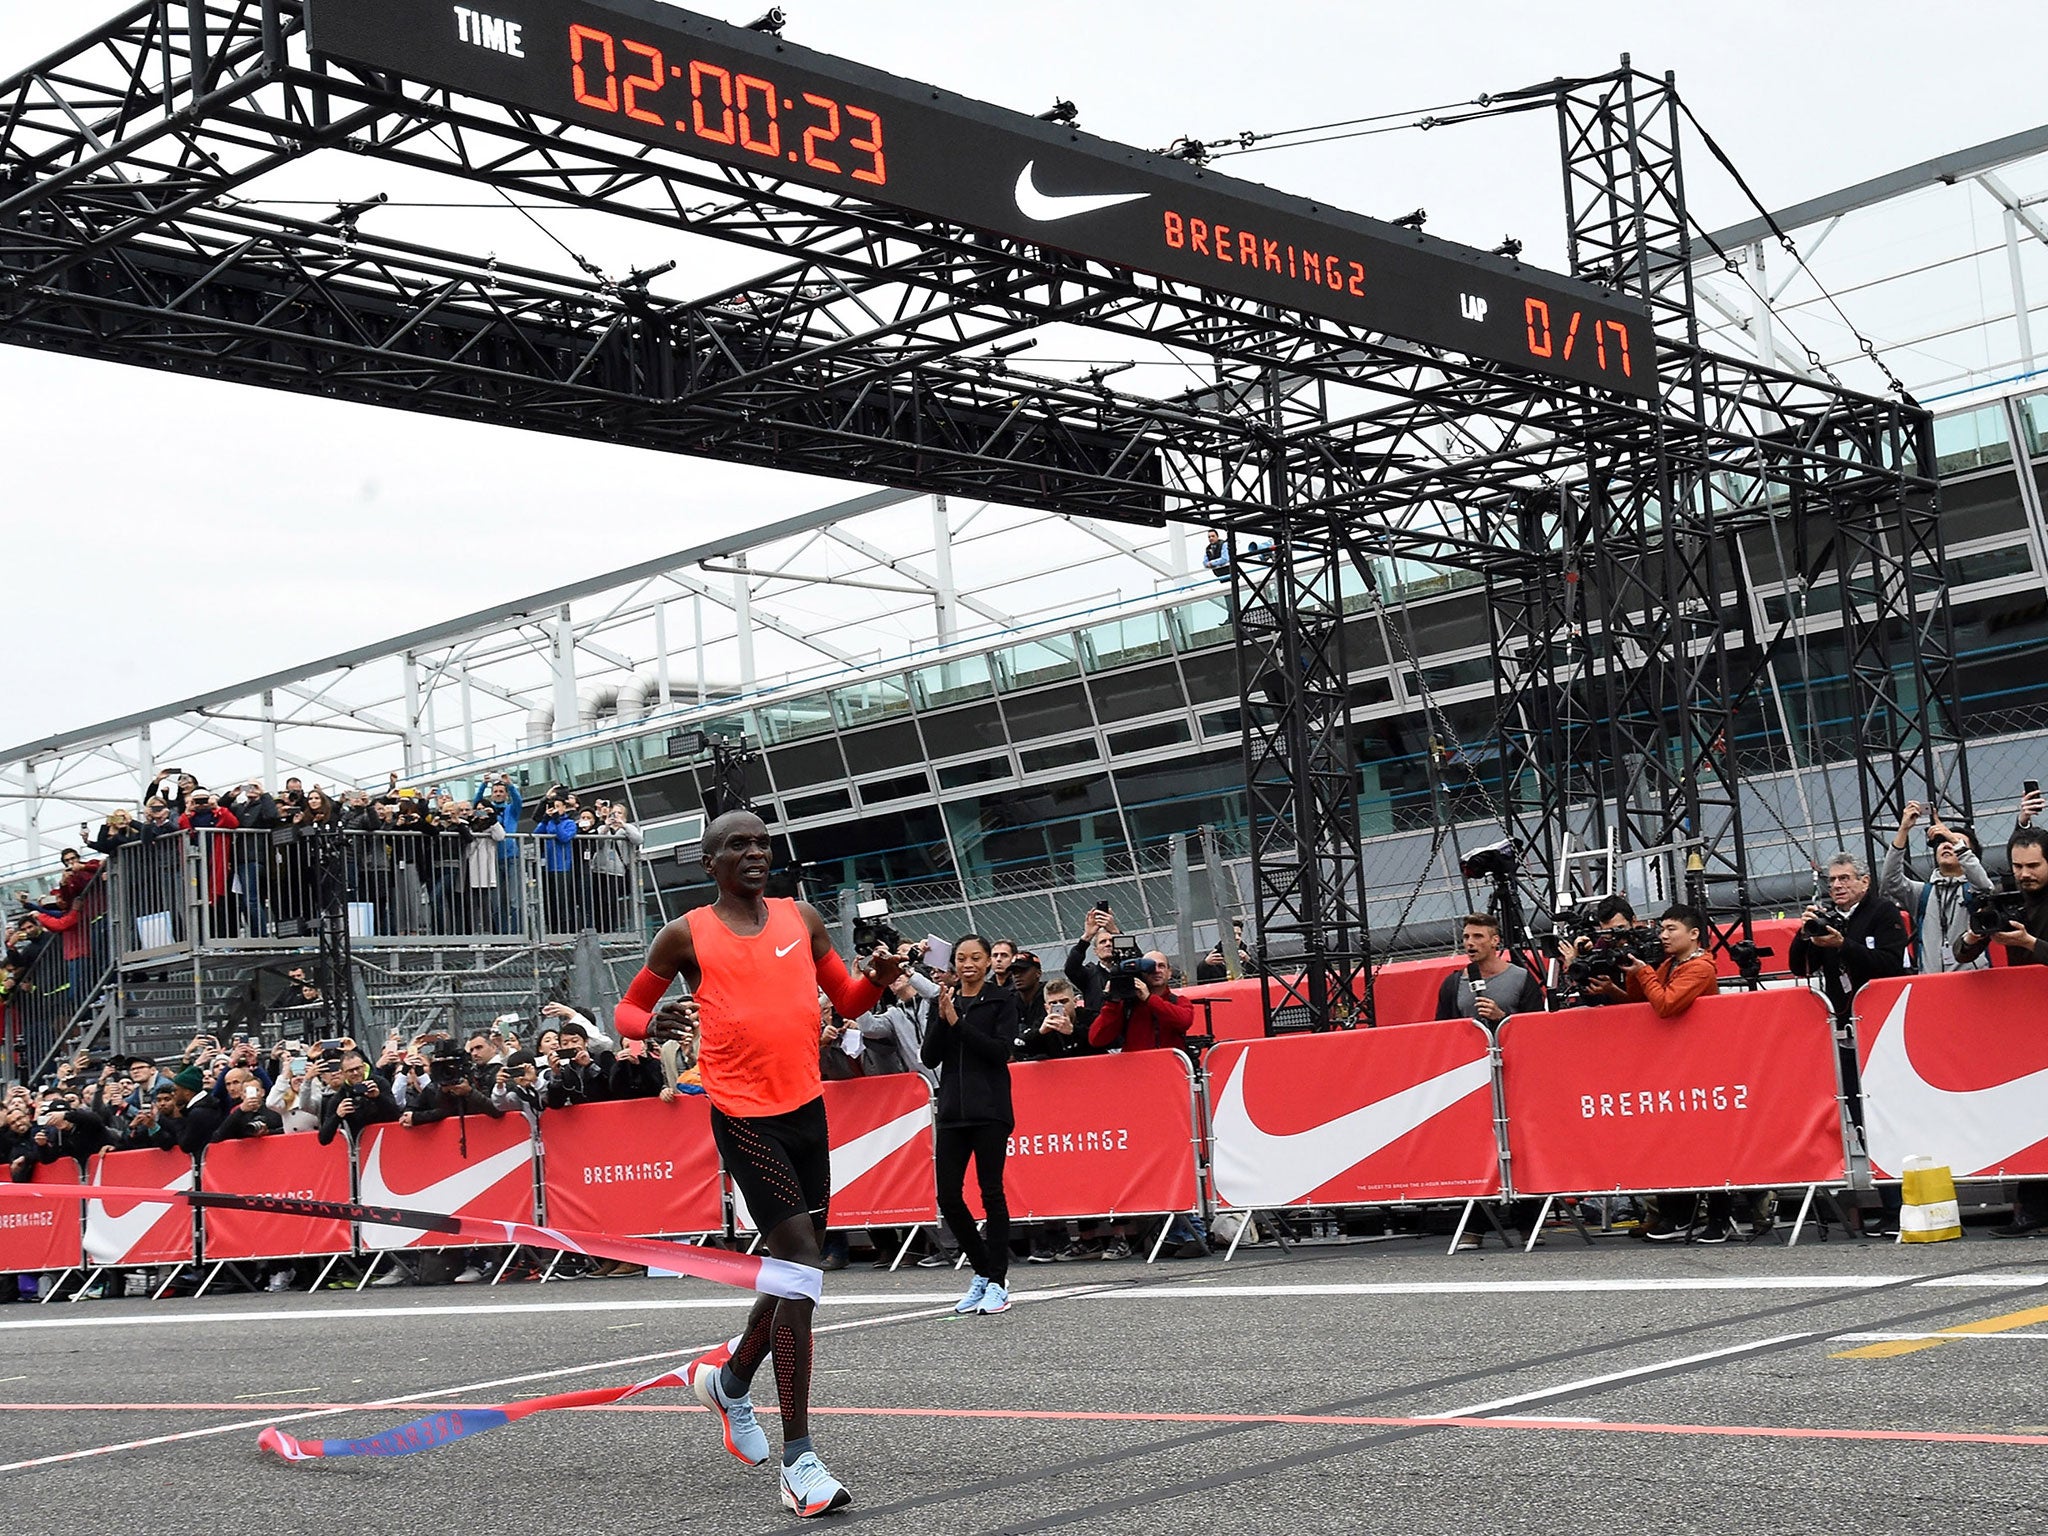 Eliud Kipchoge runs fastest marathon but doesn't break world record during Nike Breaking2 race | The Independent | The